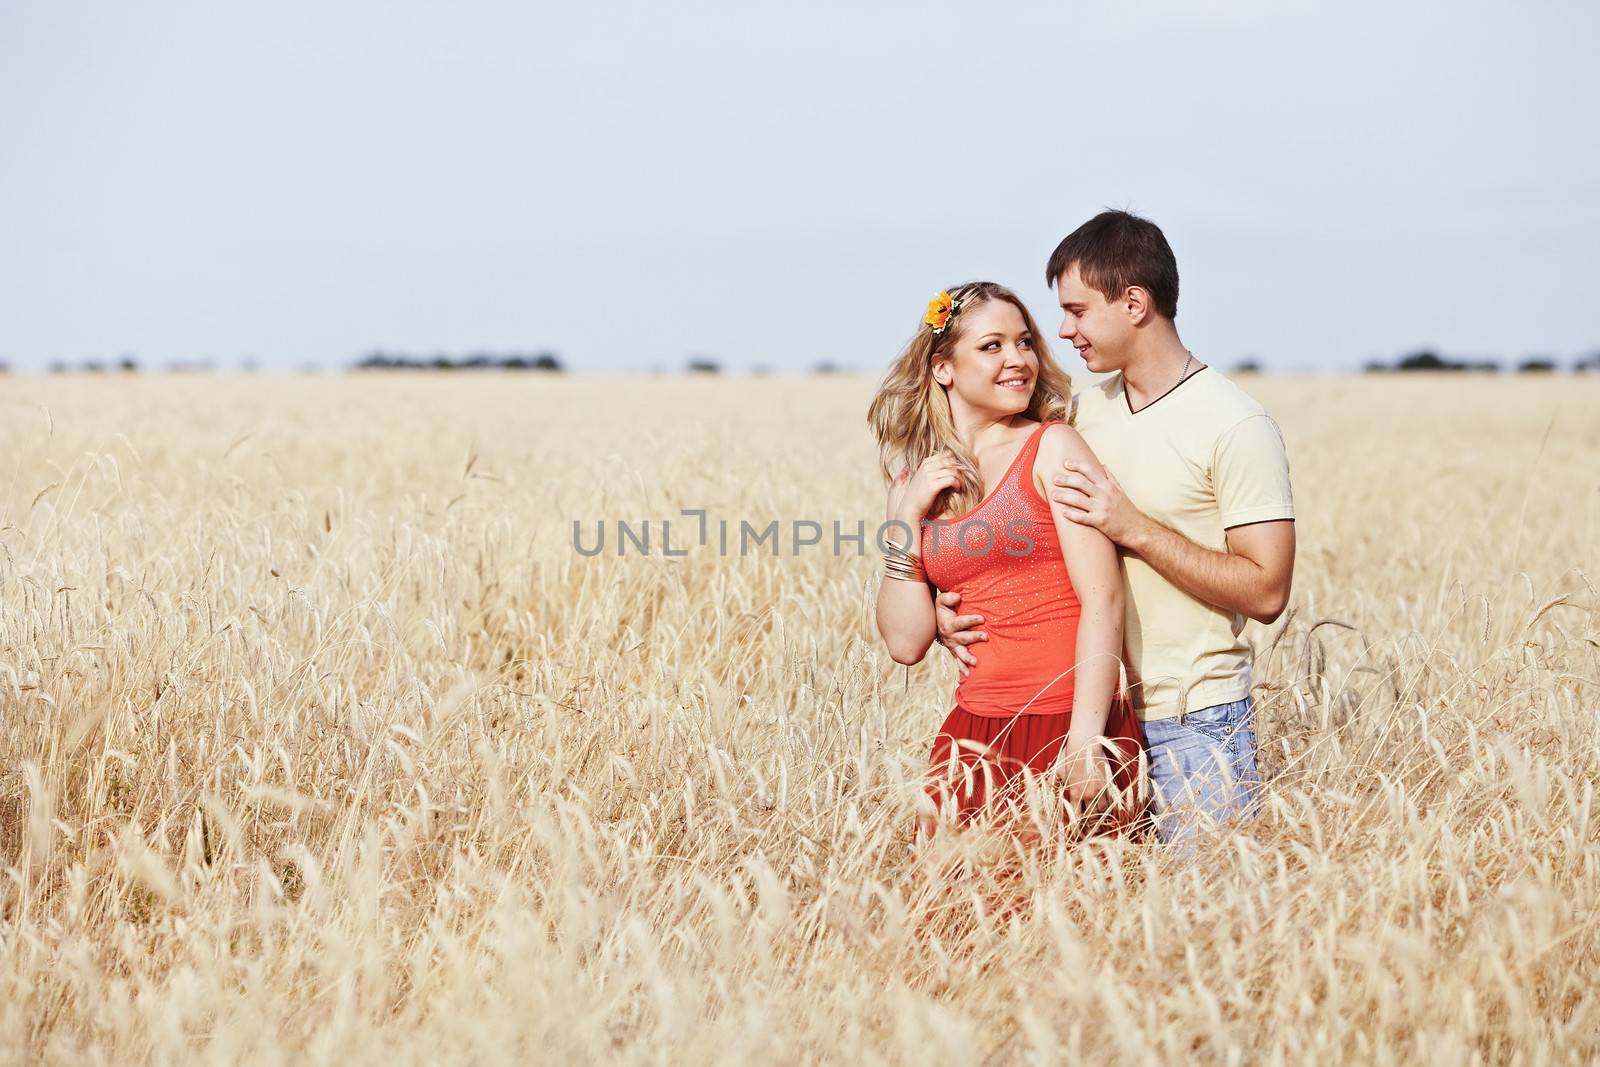 Laughing children in wheat field